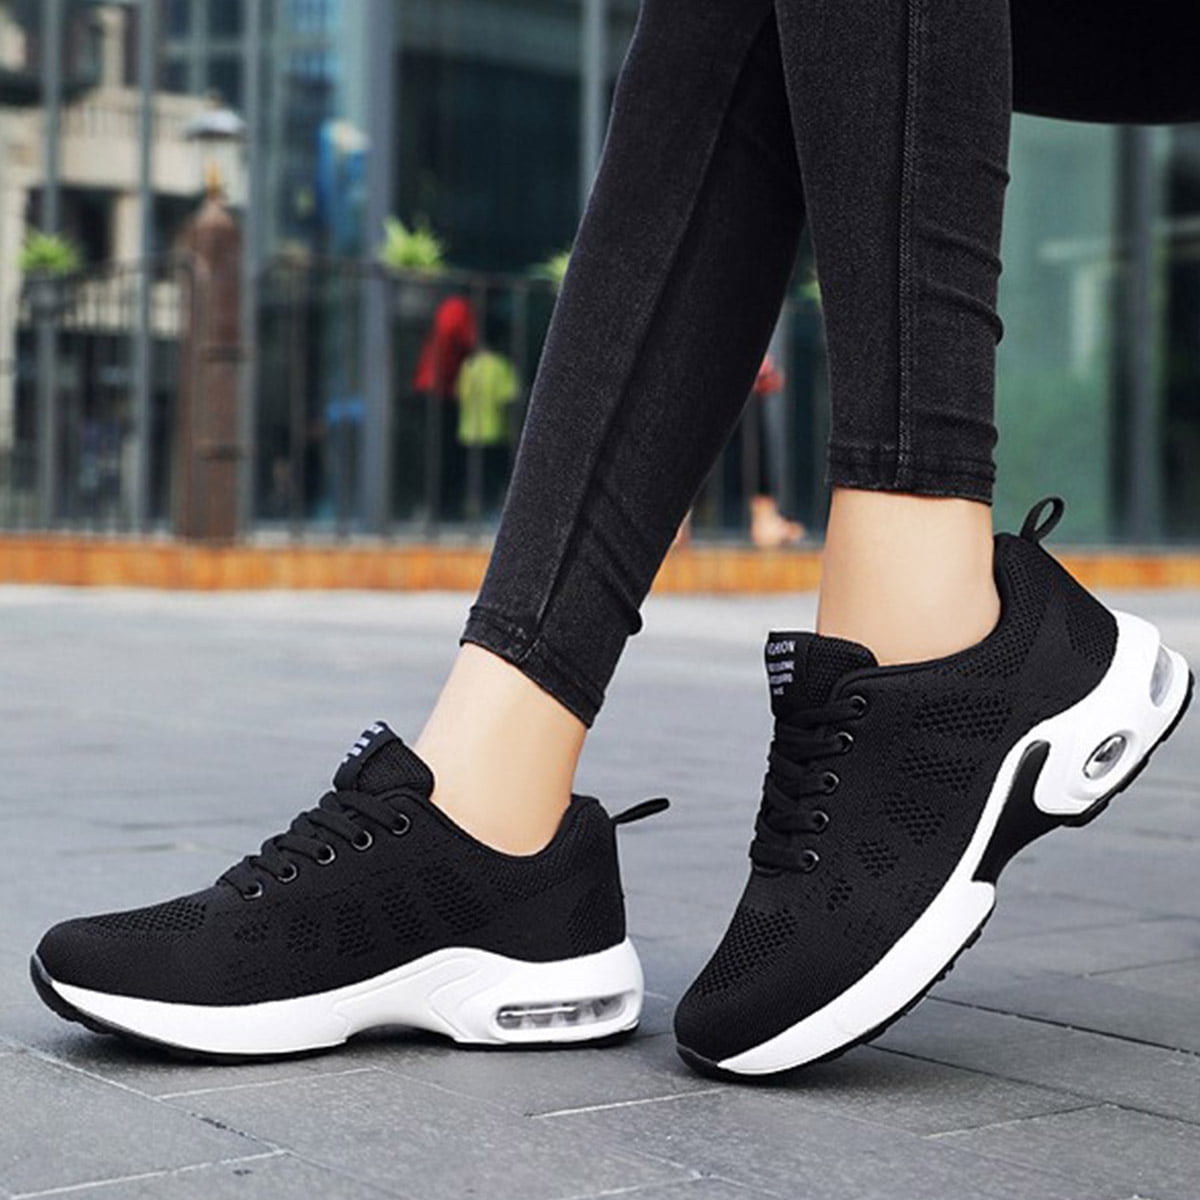 Women's Breathable Mesh Tennis Shoes Slip-on Outdoor Leisure Sneakers Lightweight Athletic Running Shoes Mesh Breathable Slip On Walking Sneakers 